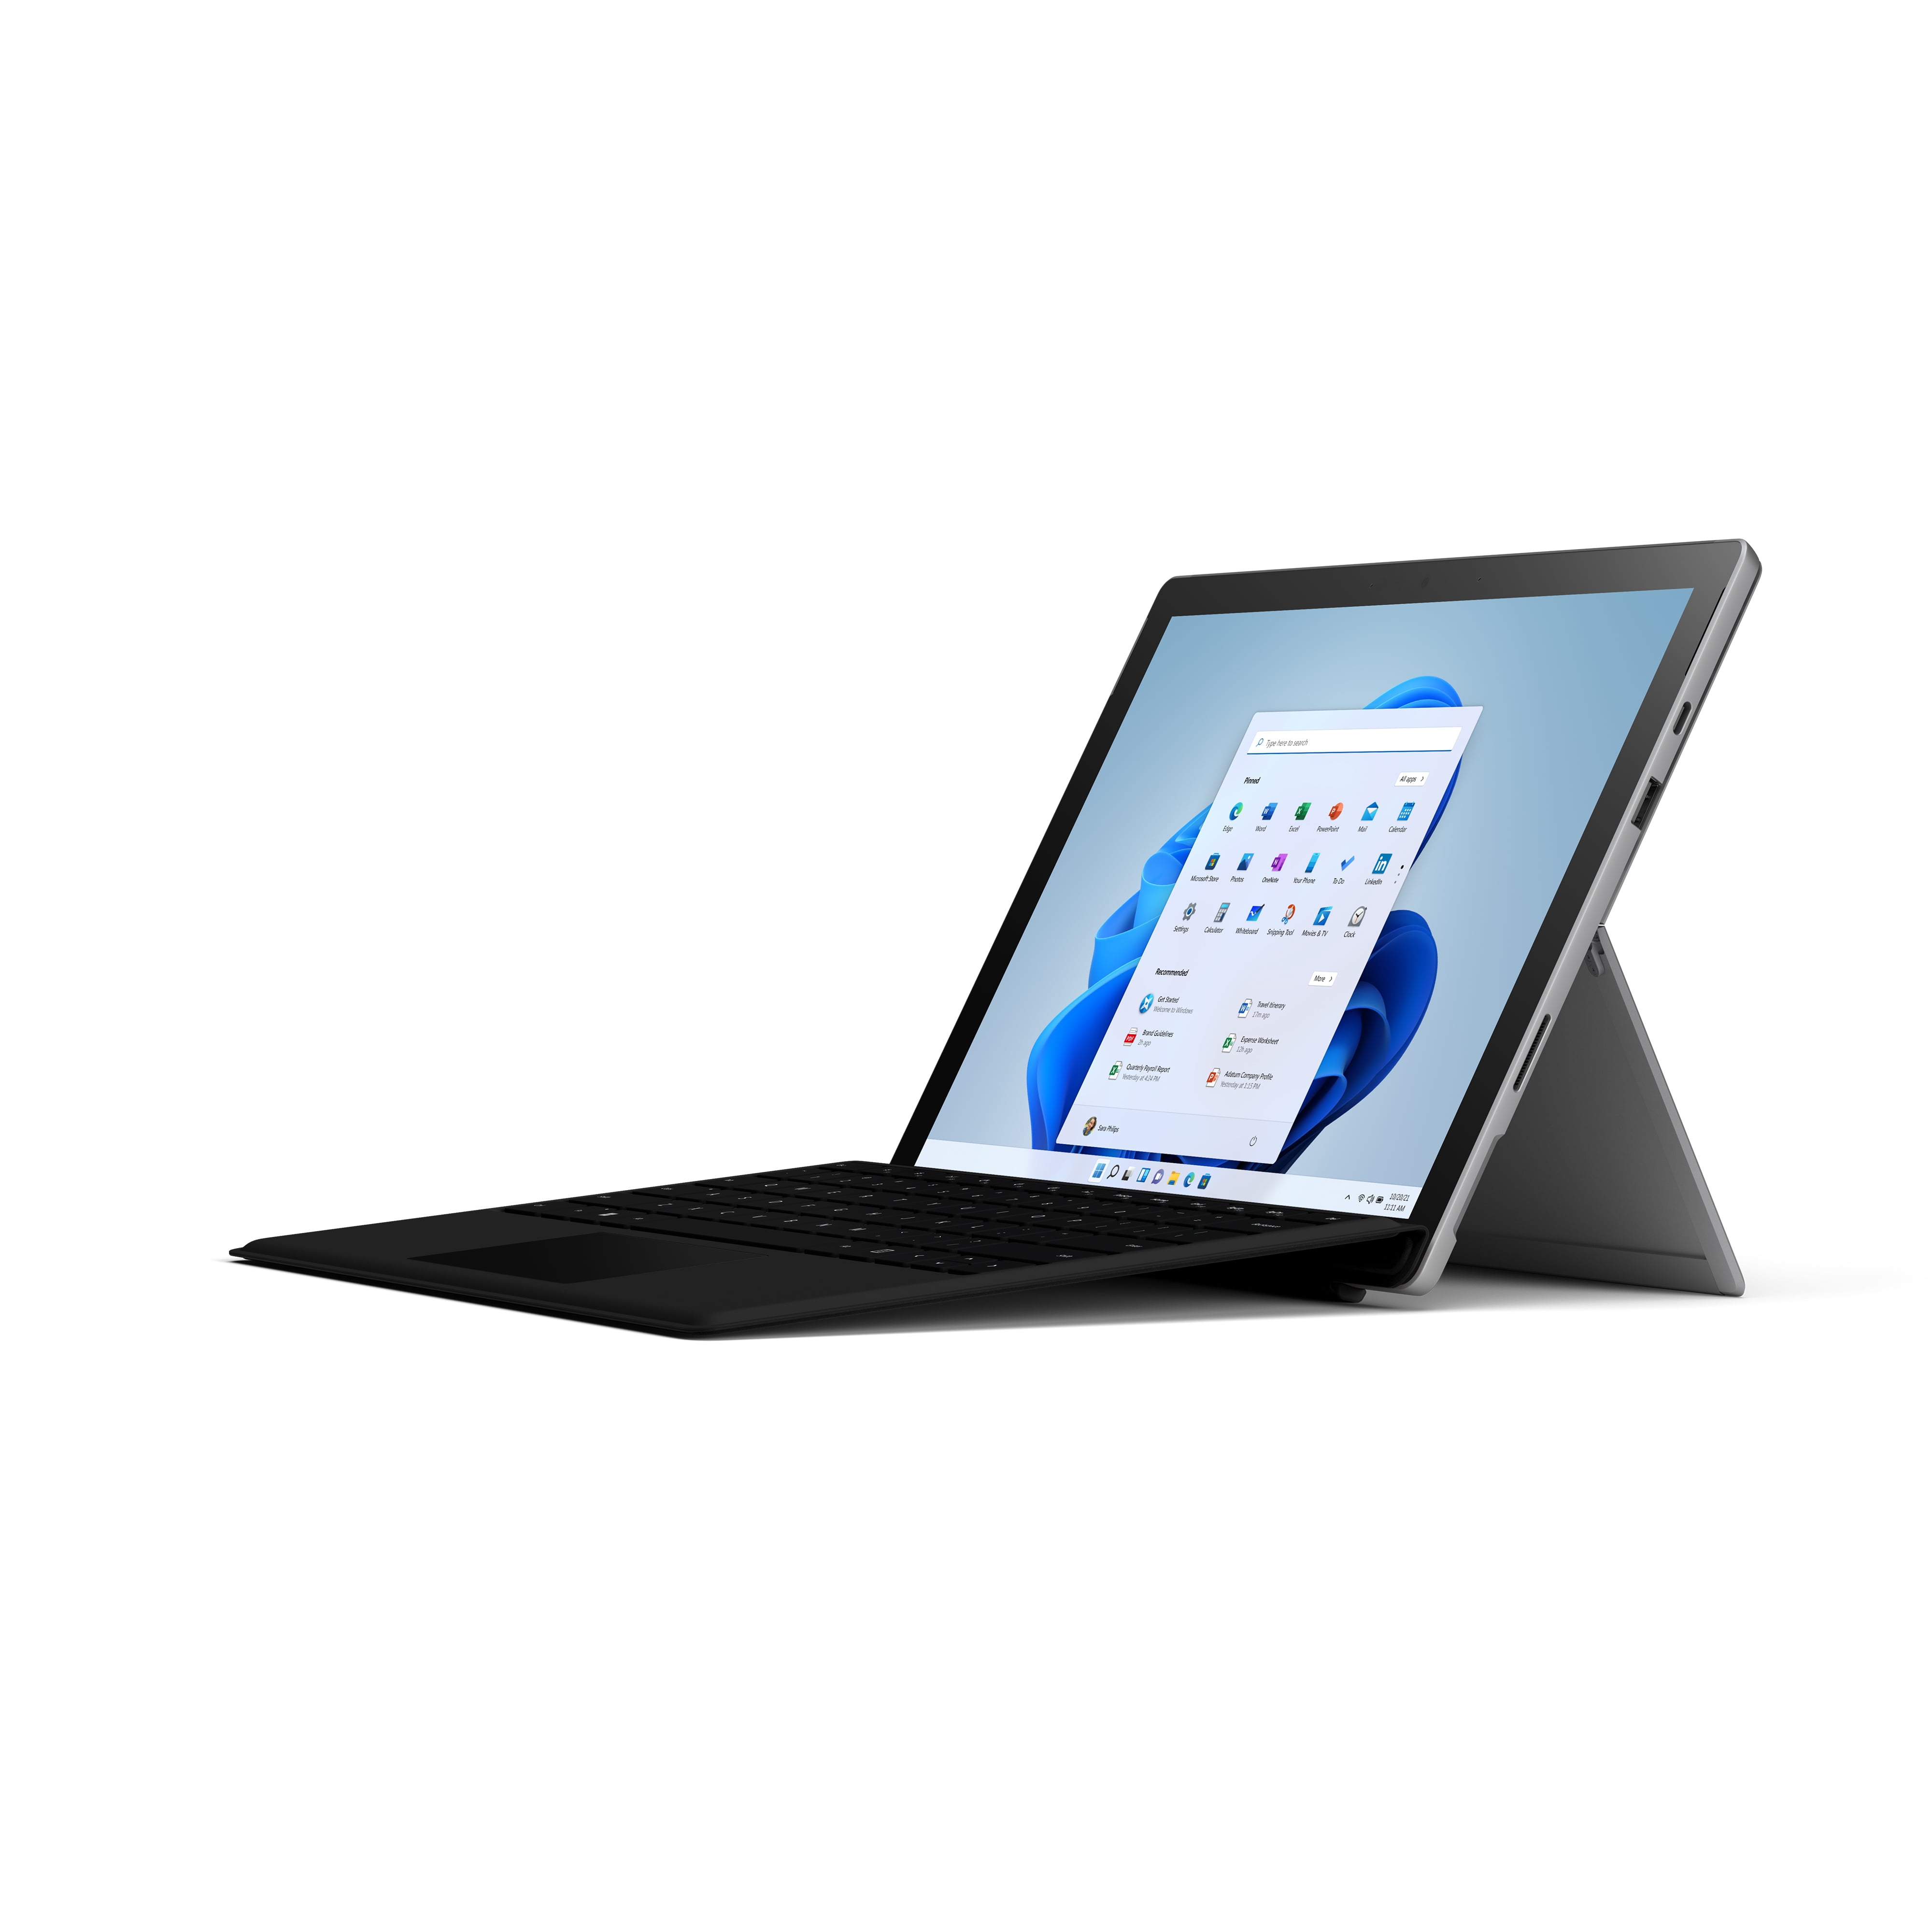 Microsoft Surface Pro 7+ 2-In-1, 12.3" Touch Screen, Intel Core i3, 8GB RAM, 128GB SSD, Windows 11 Home, Platinum, with Black Type Cover - Walmart